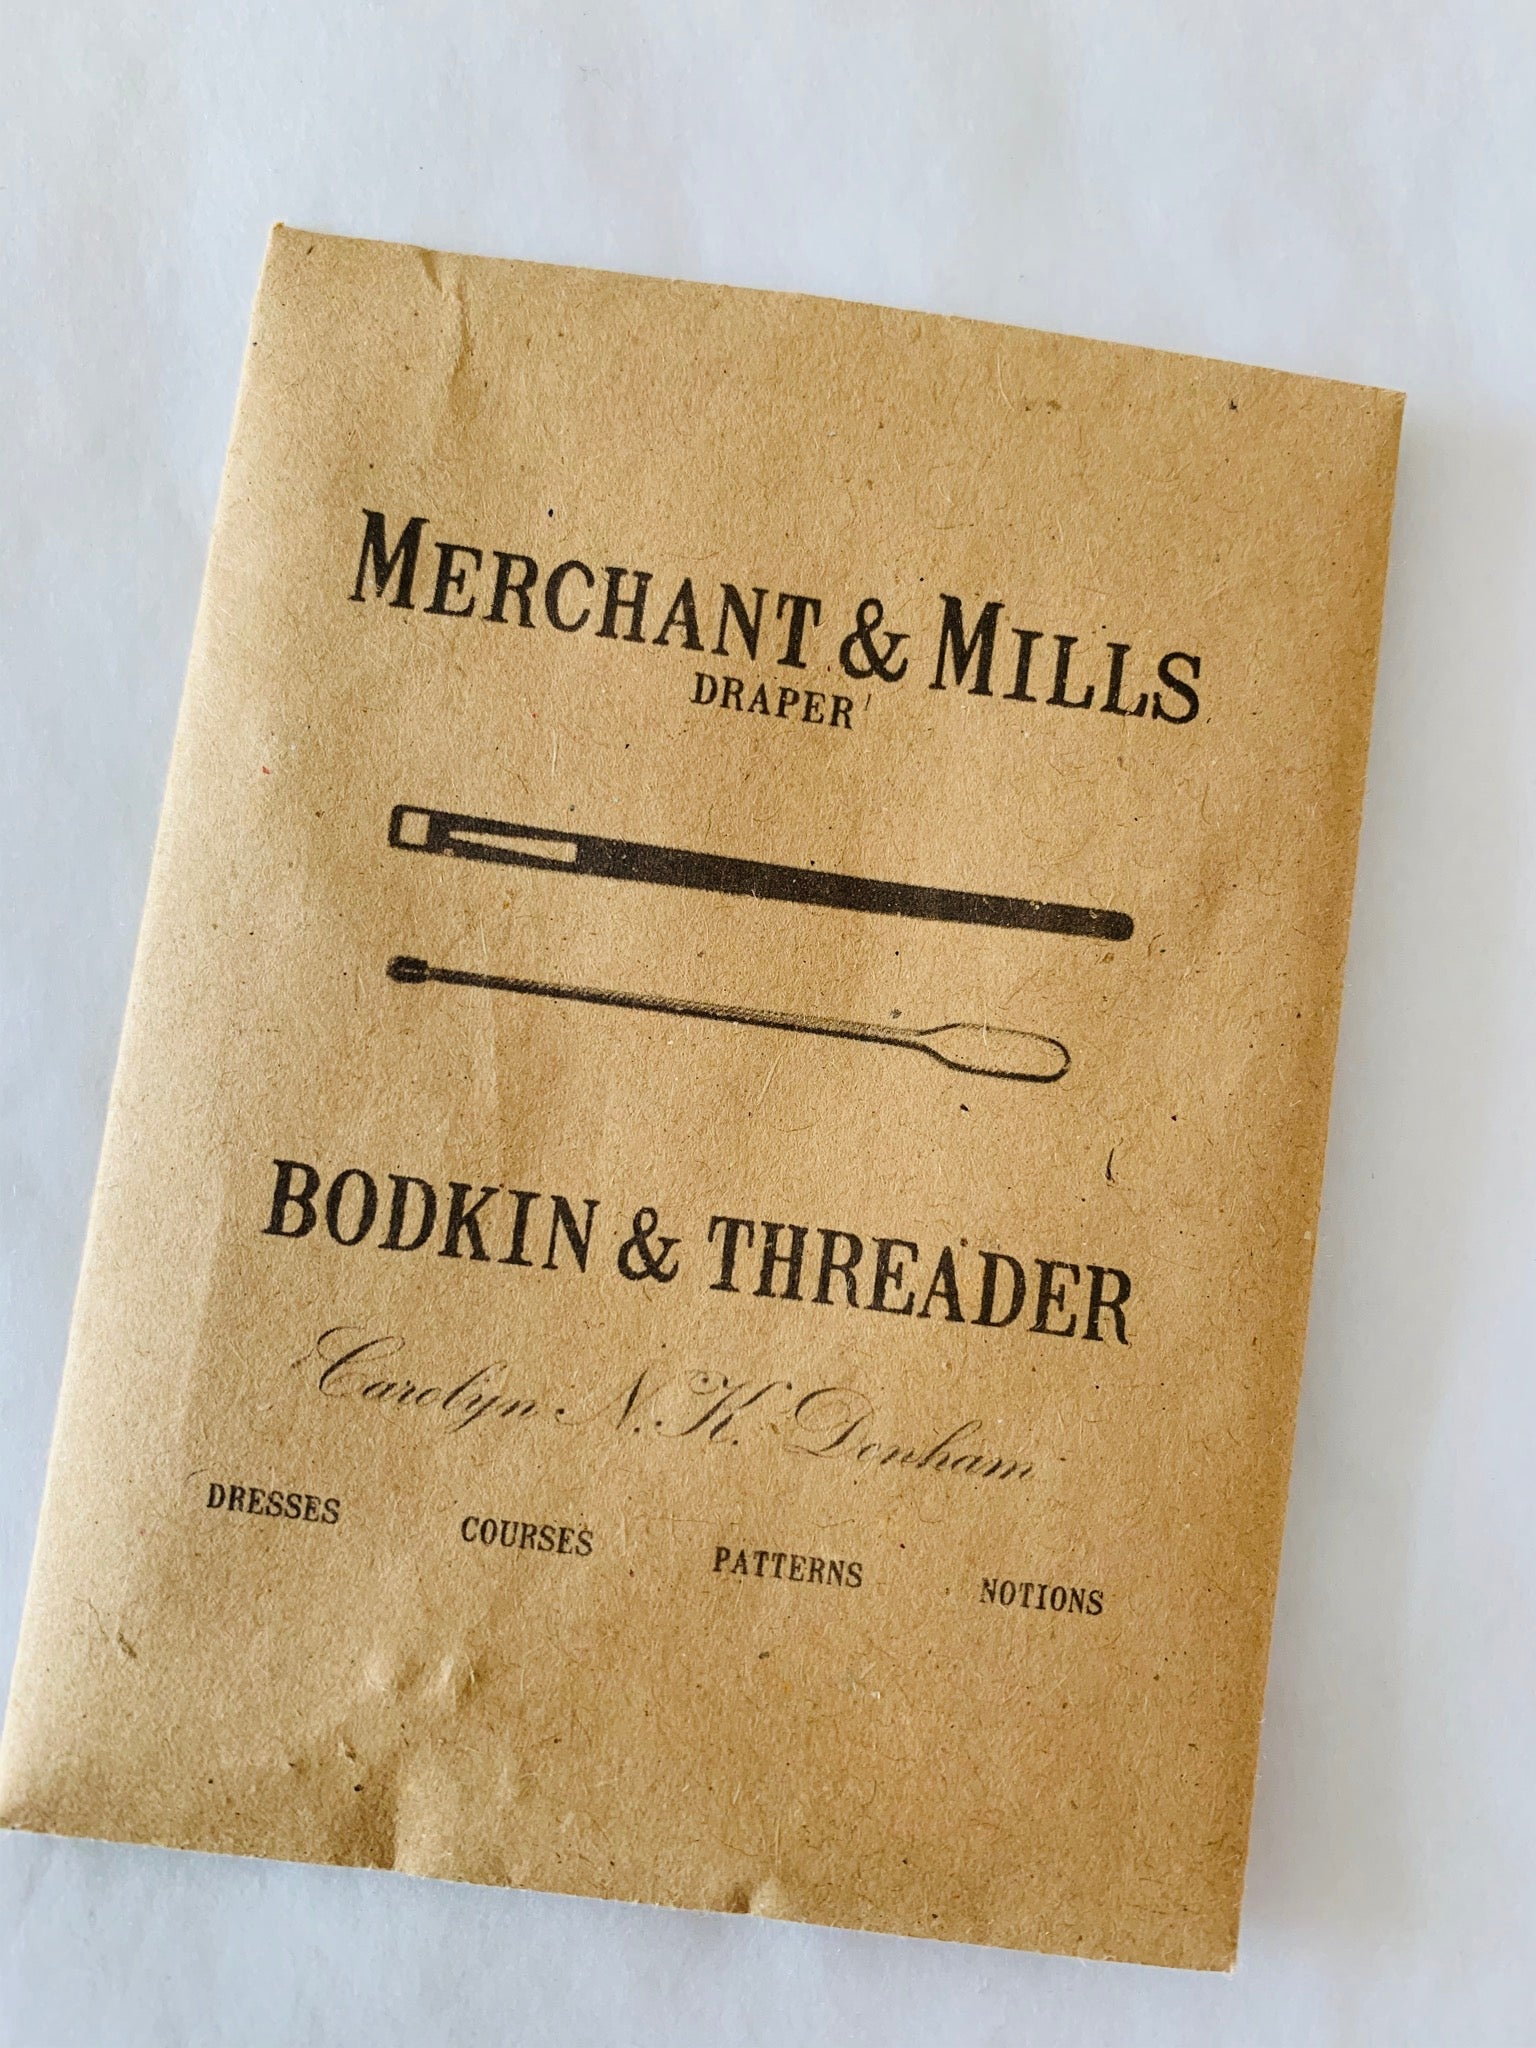 Merchant and Mills Bodkin and Threader